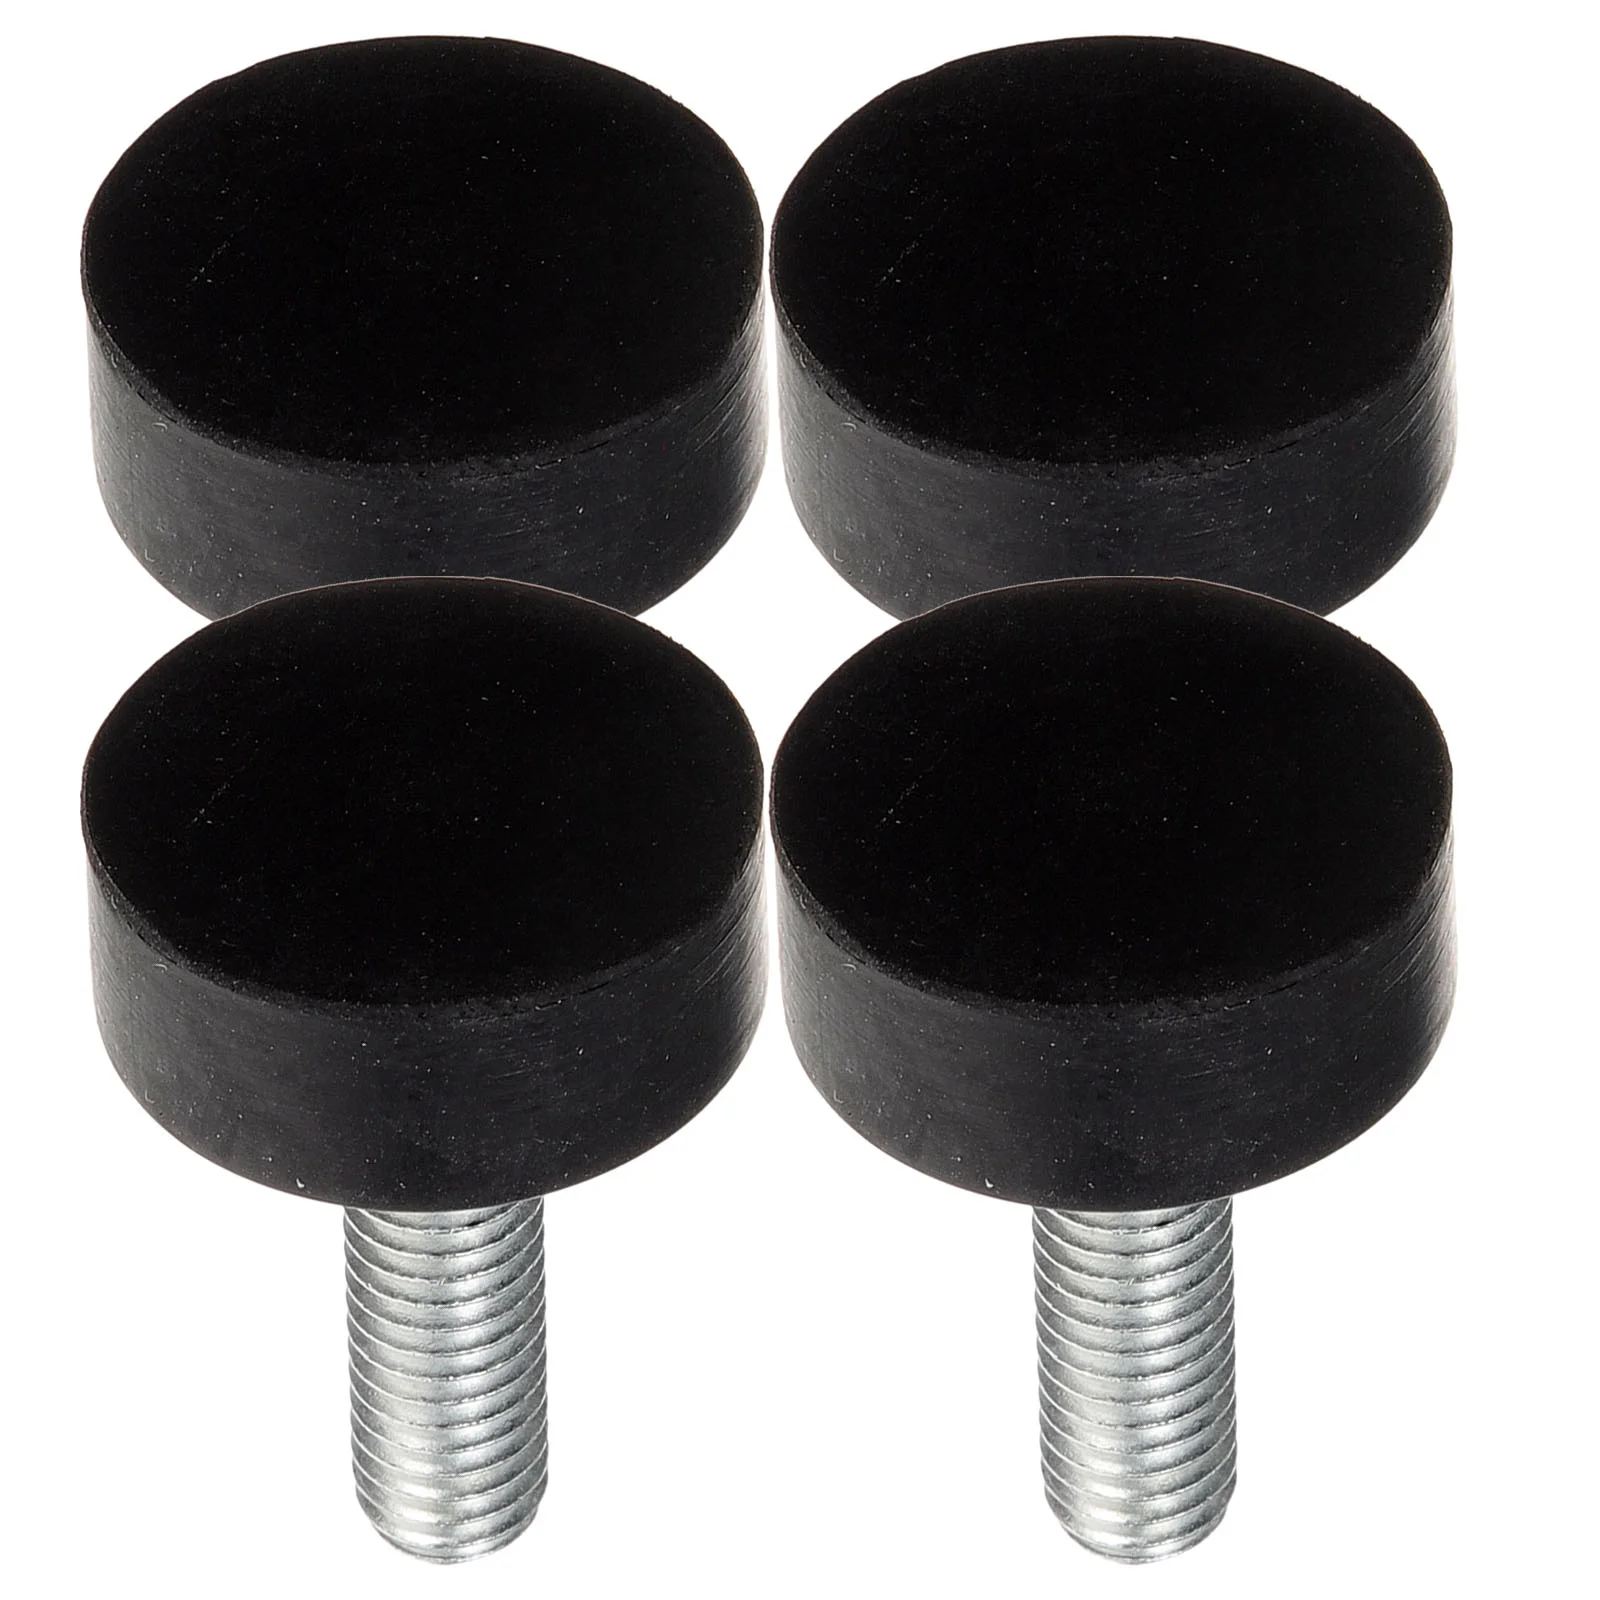 

4pcs Rubber Feet Pad Screw In Rubber Feet Furniture Leg Bumpers Pads for Tables Sofas